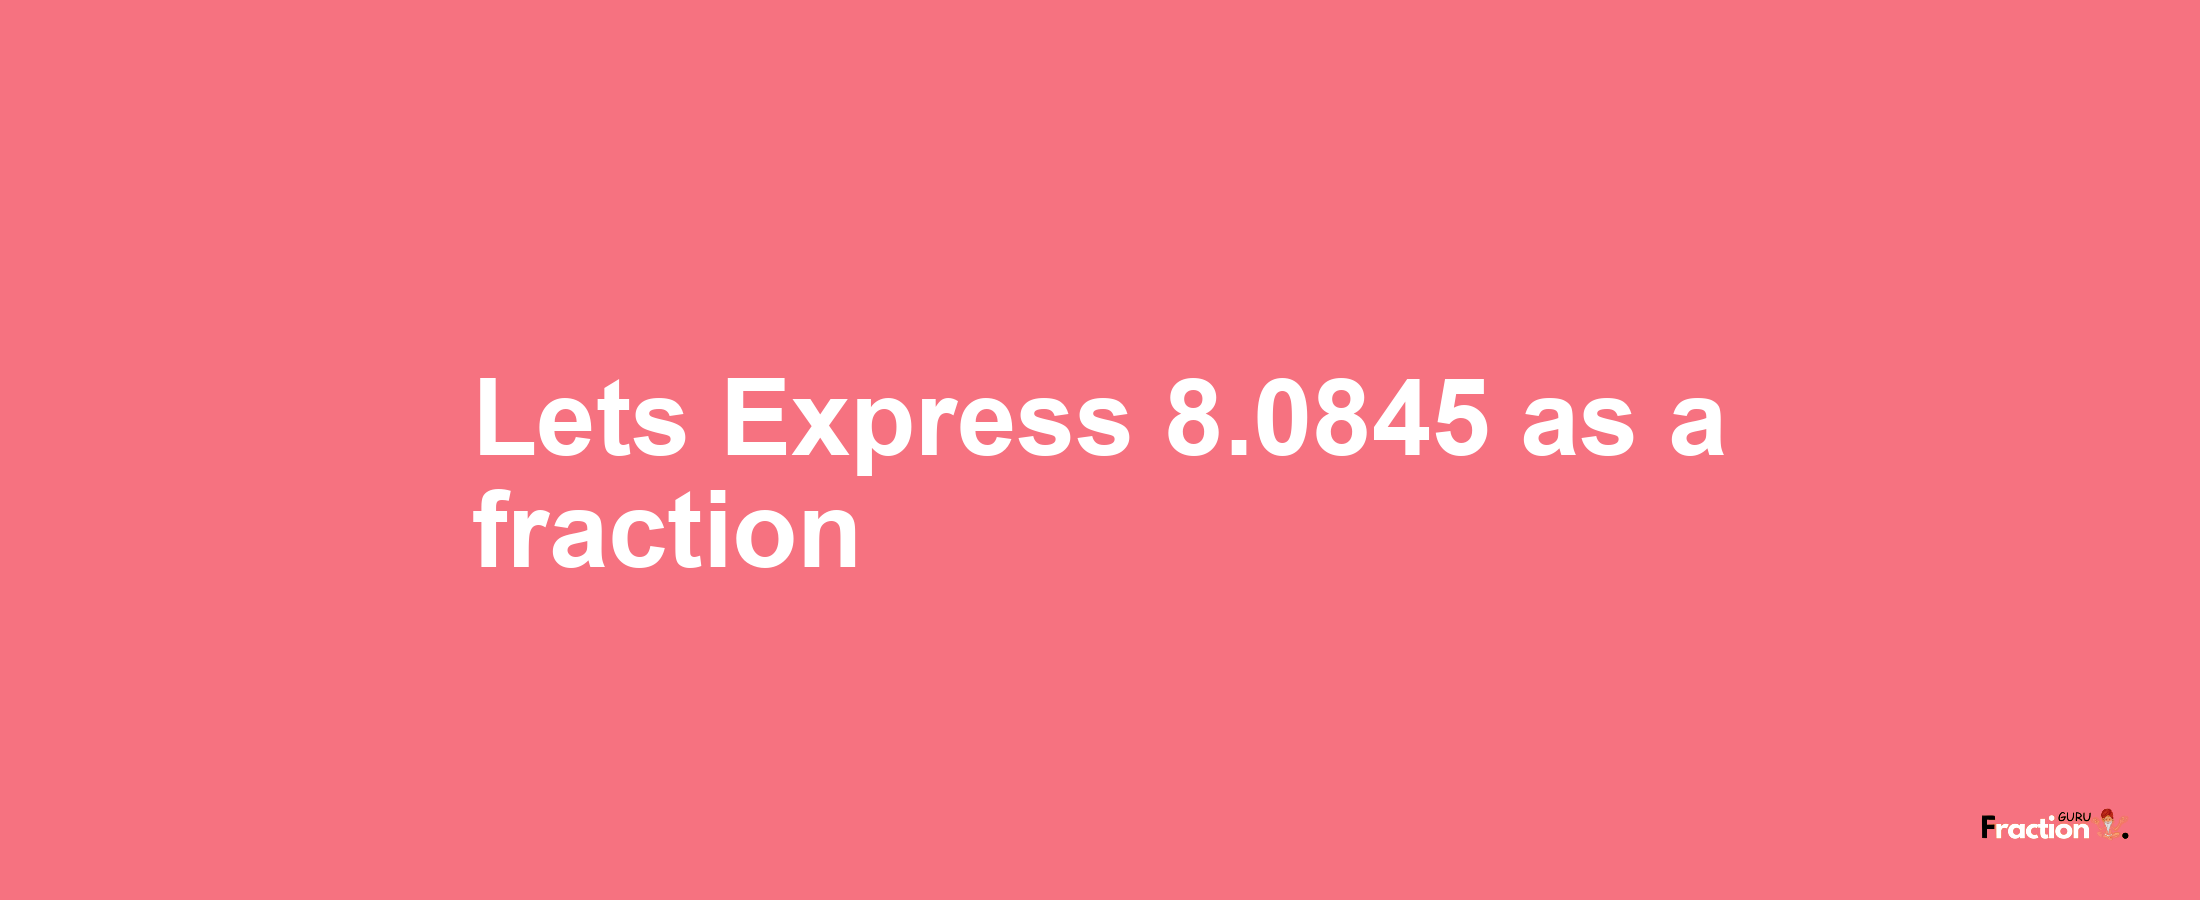 Lets Express 8.0845 as afraction